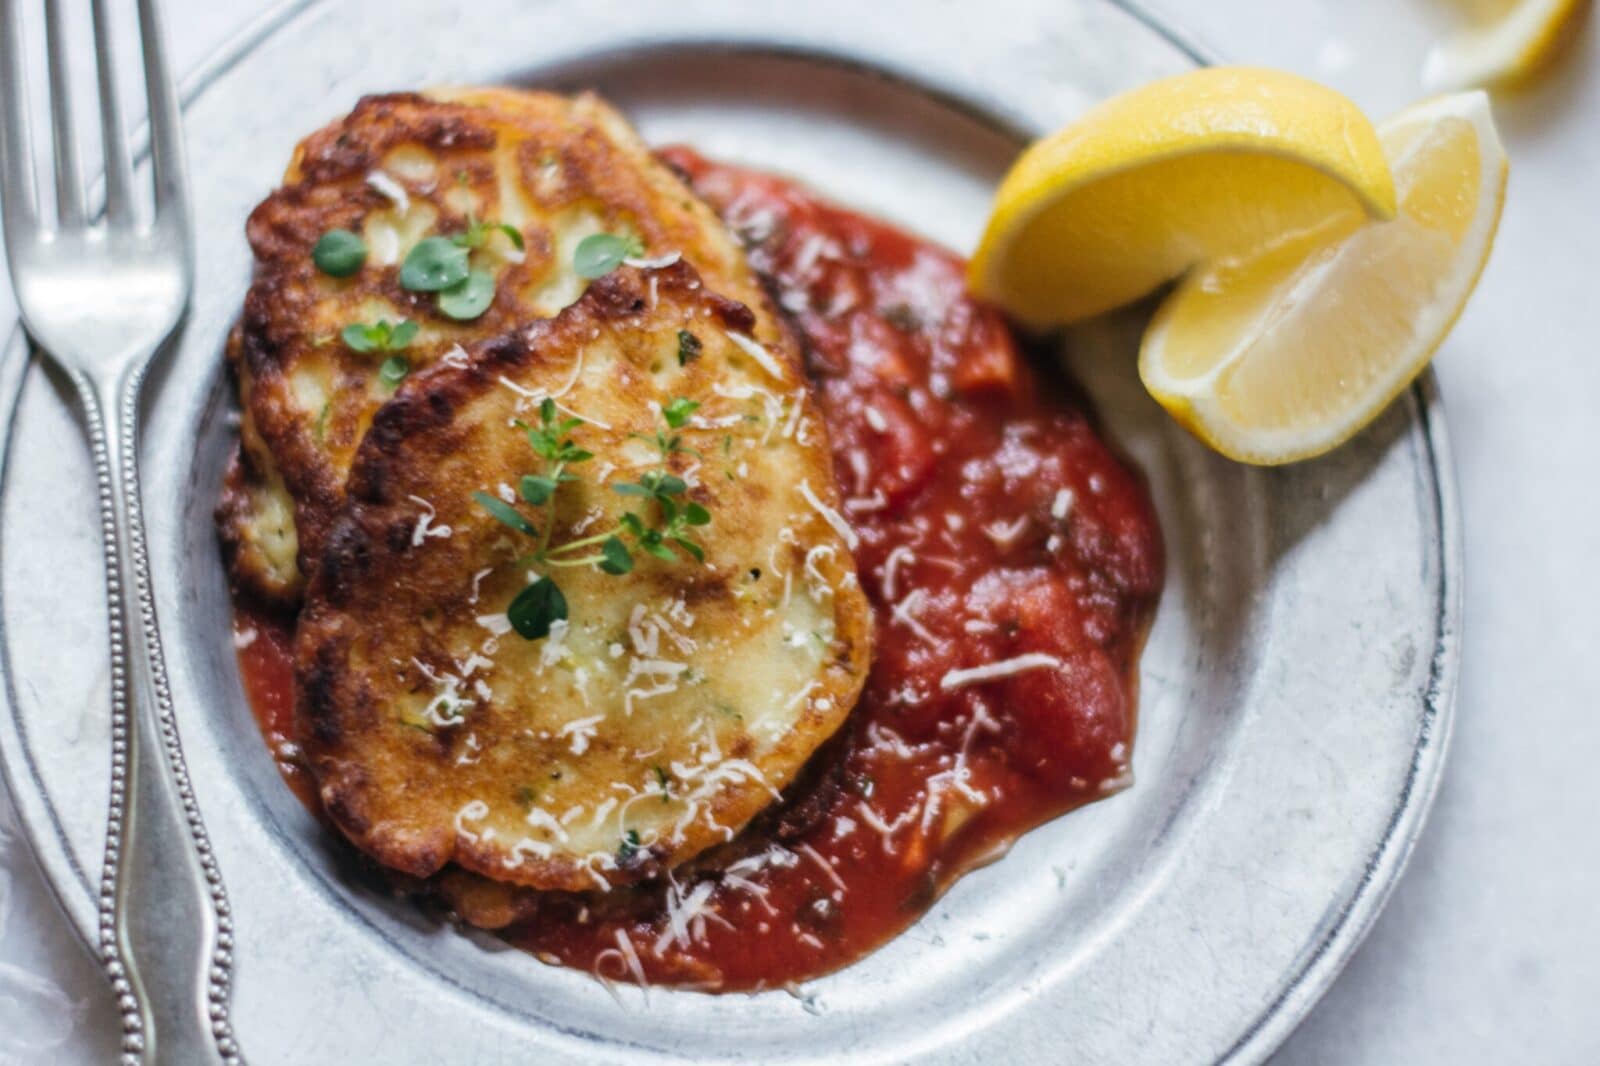 Serving Ricotta Cakes with Tomato Sauce